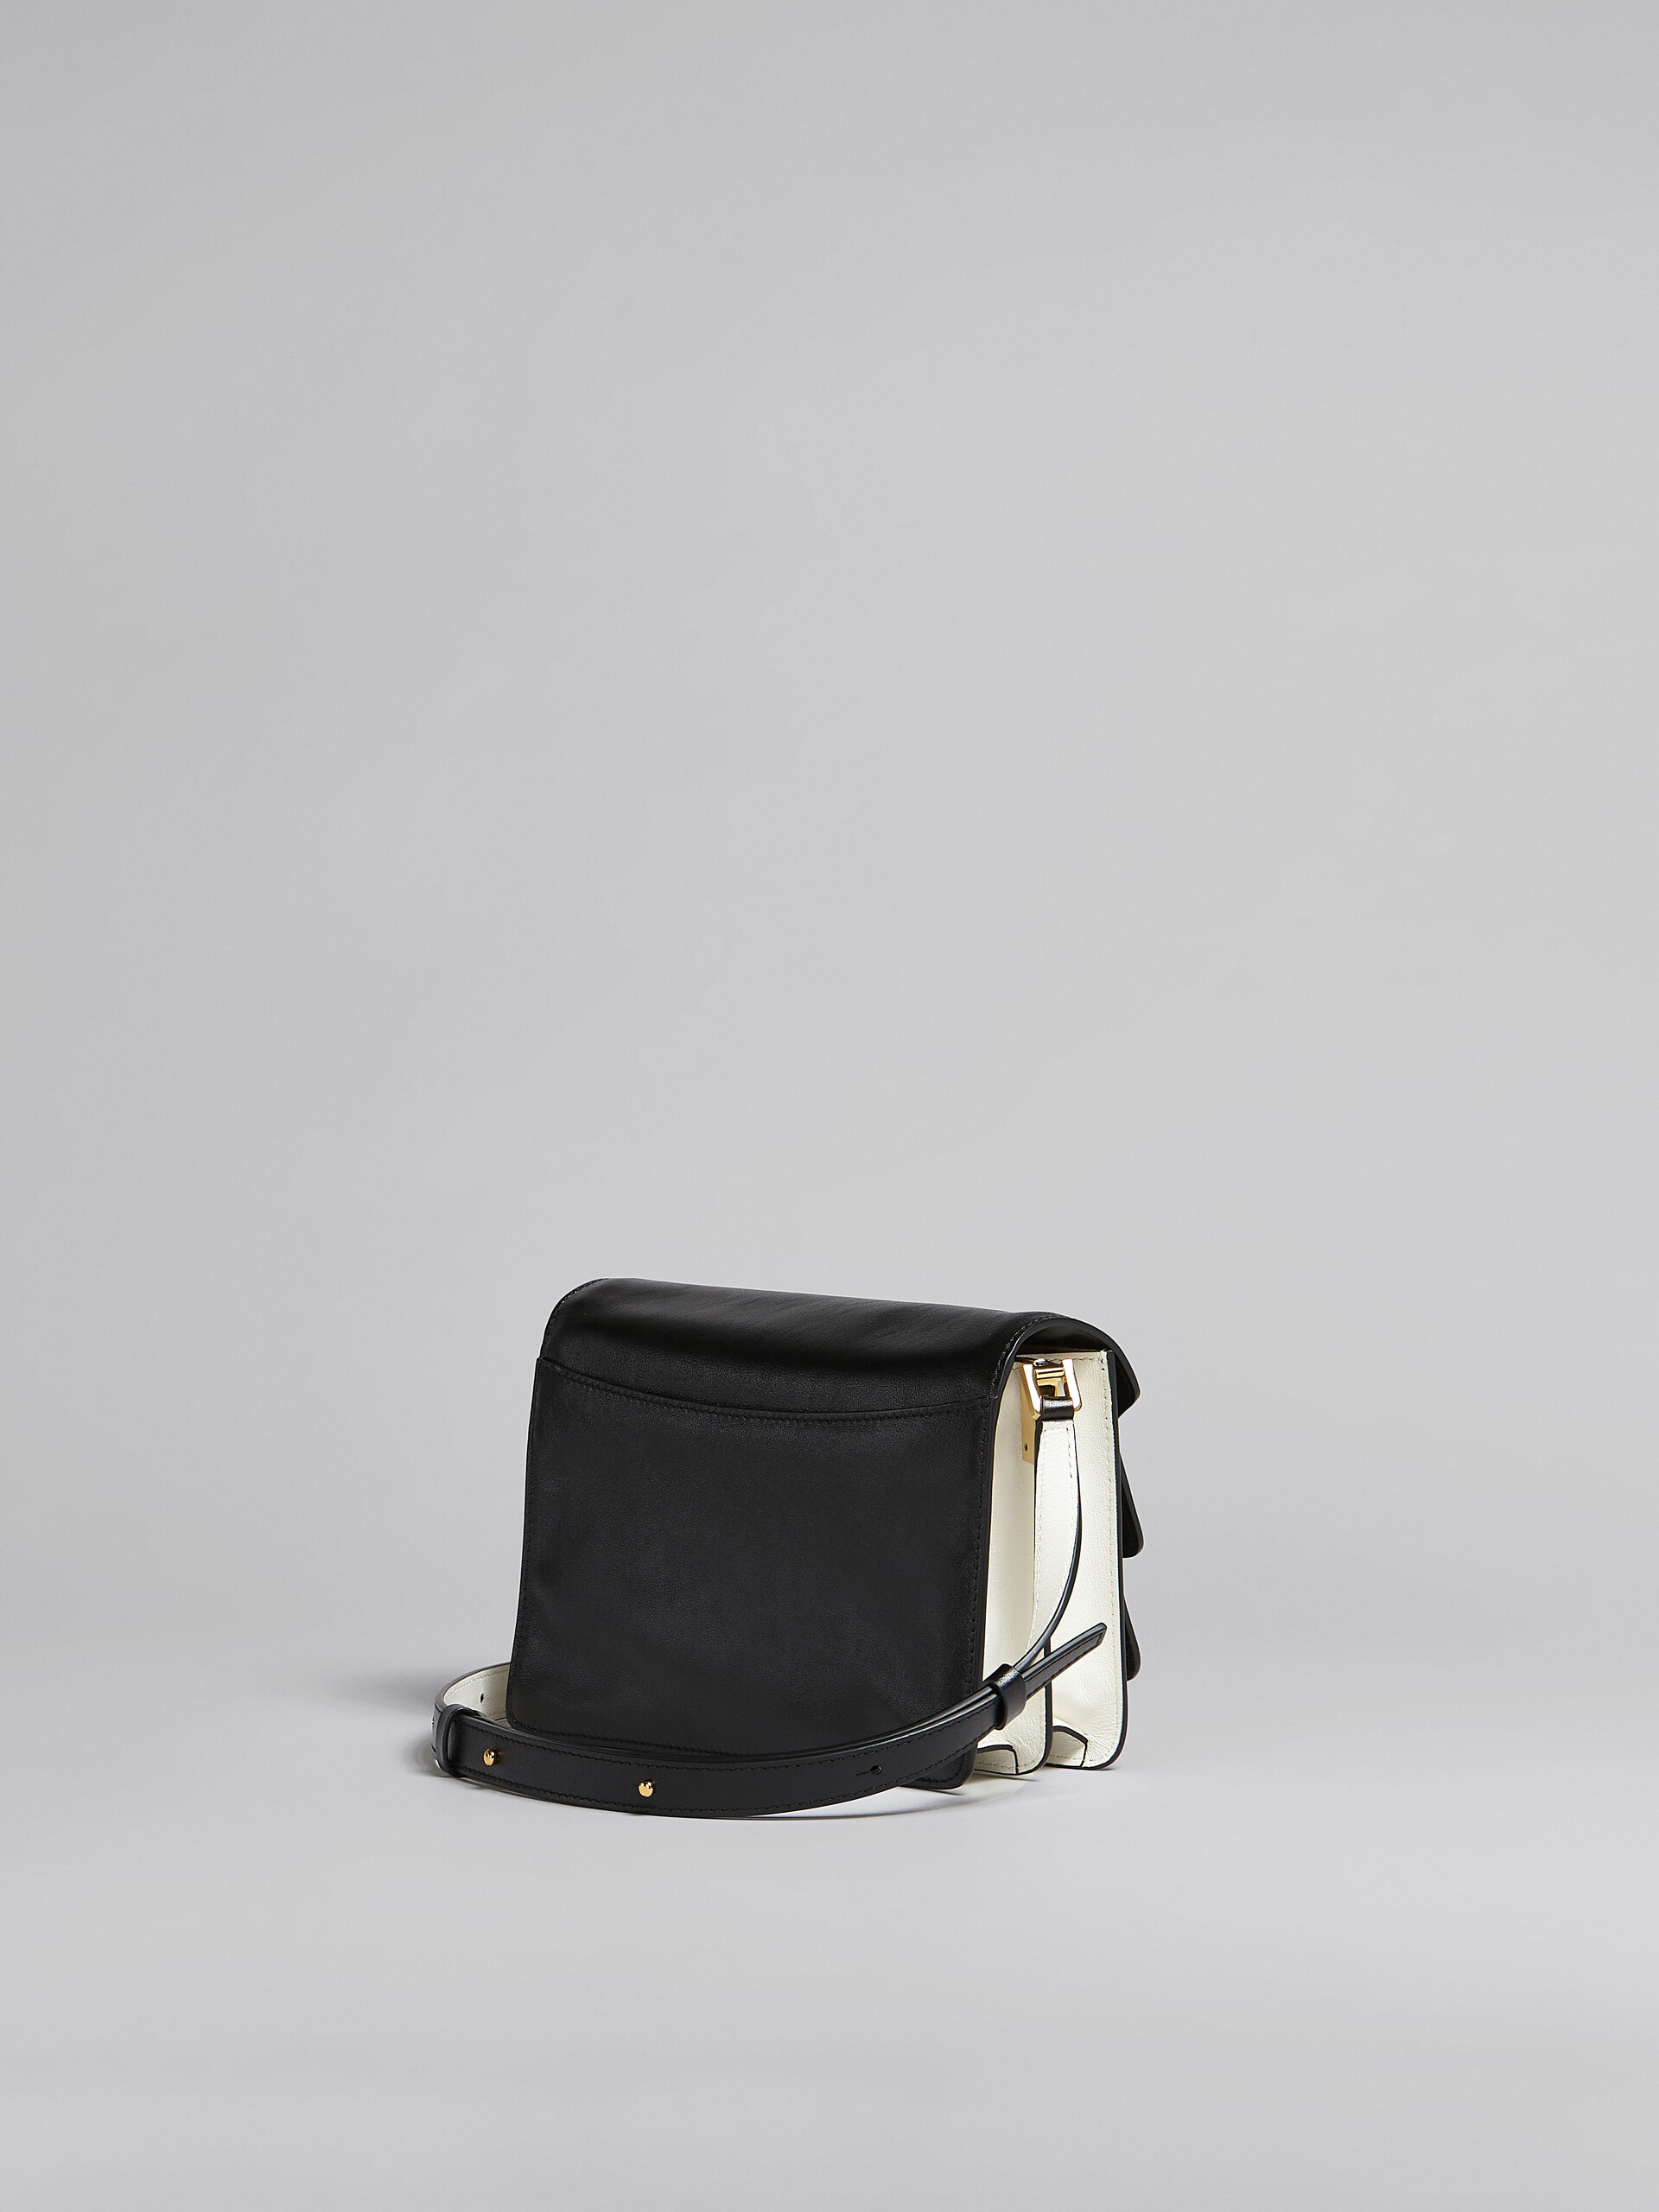 Trunk Soft Medium Bag in black and white leather - Shoulder Bags - Image 3